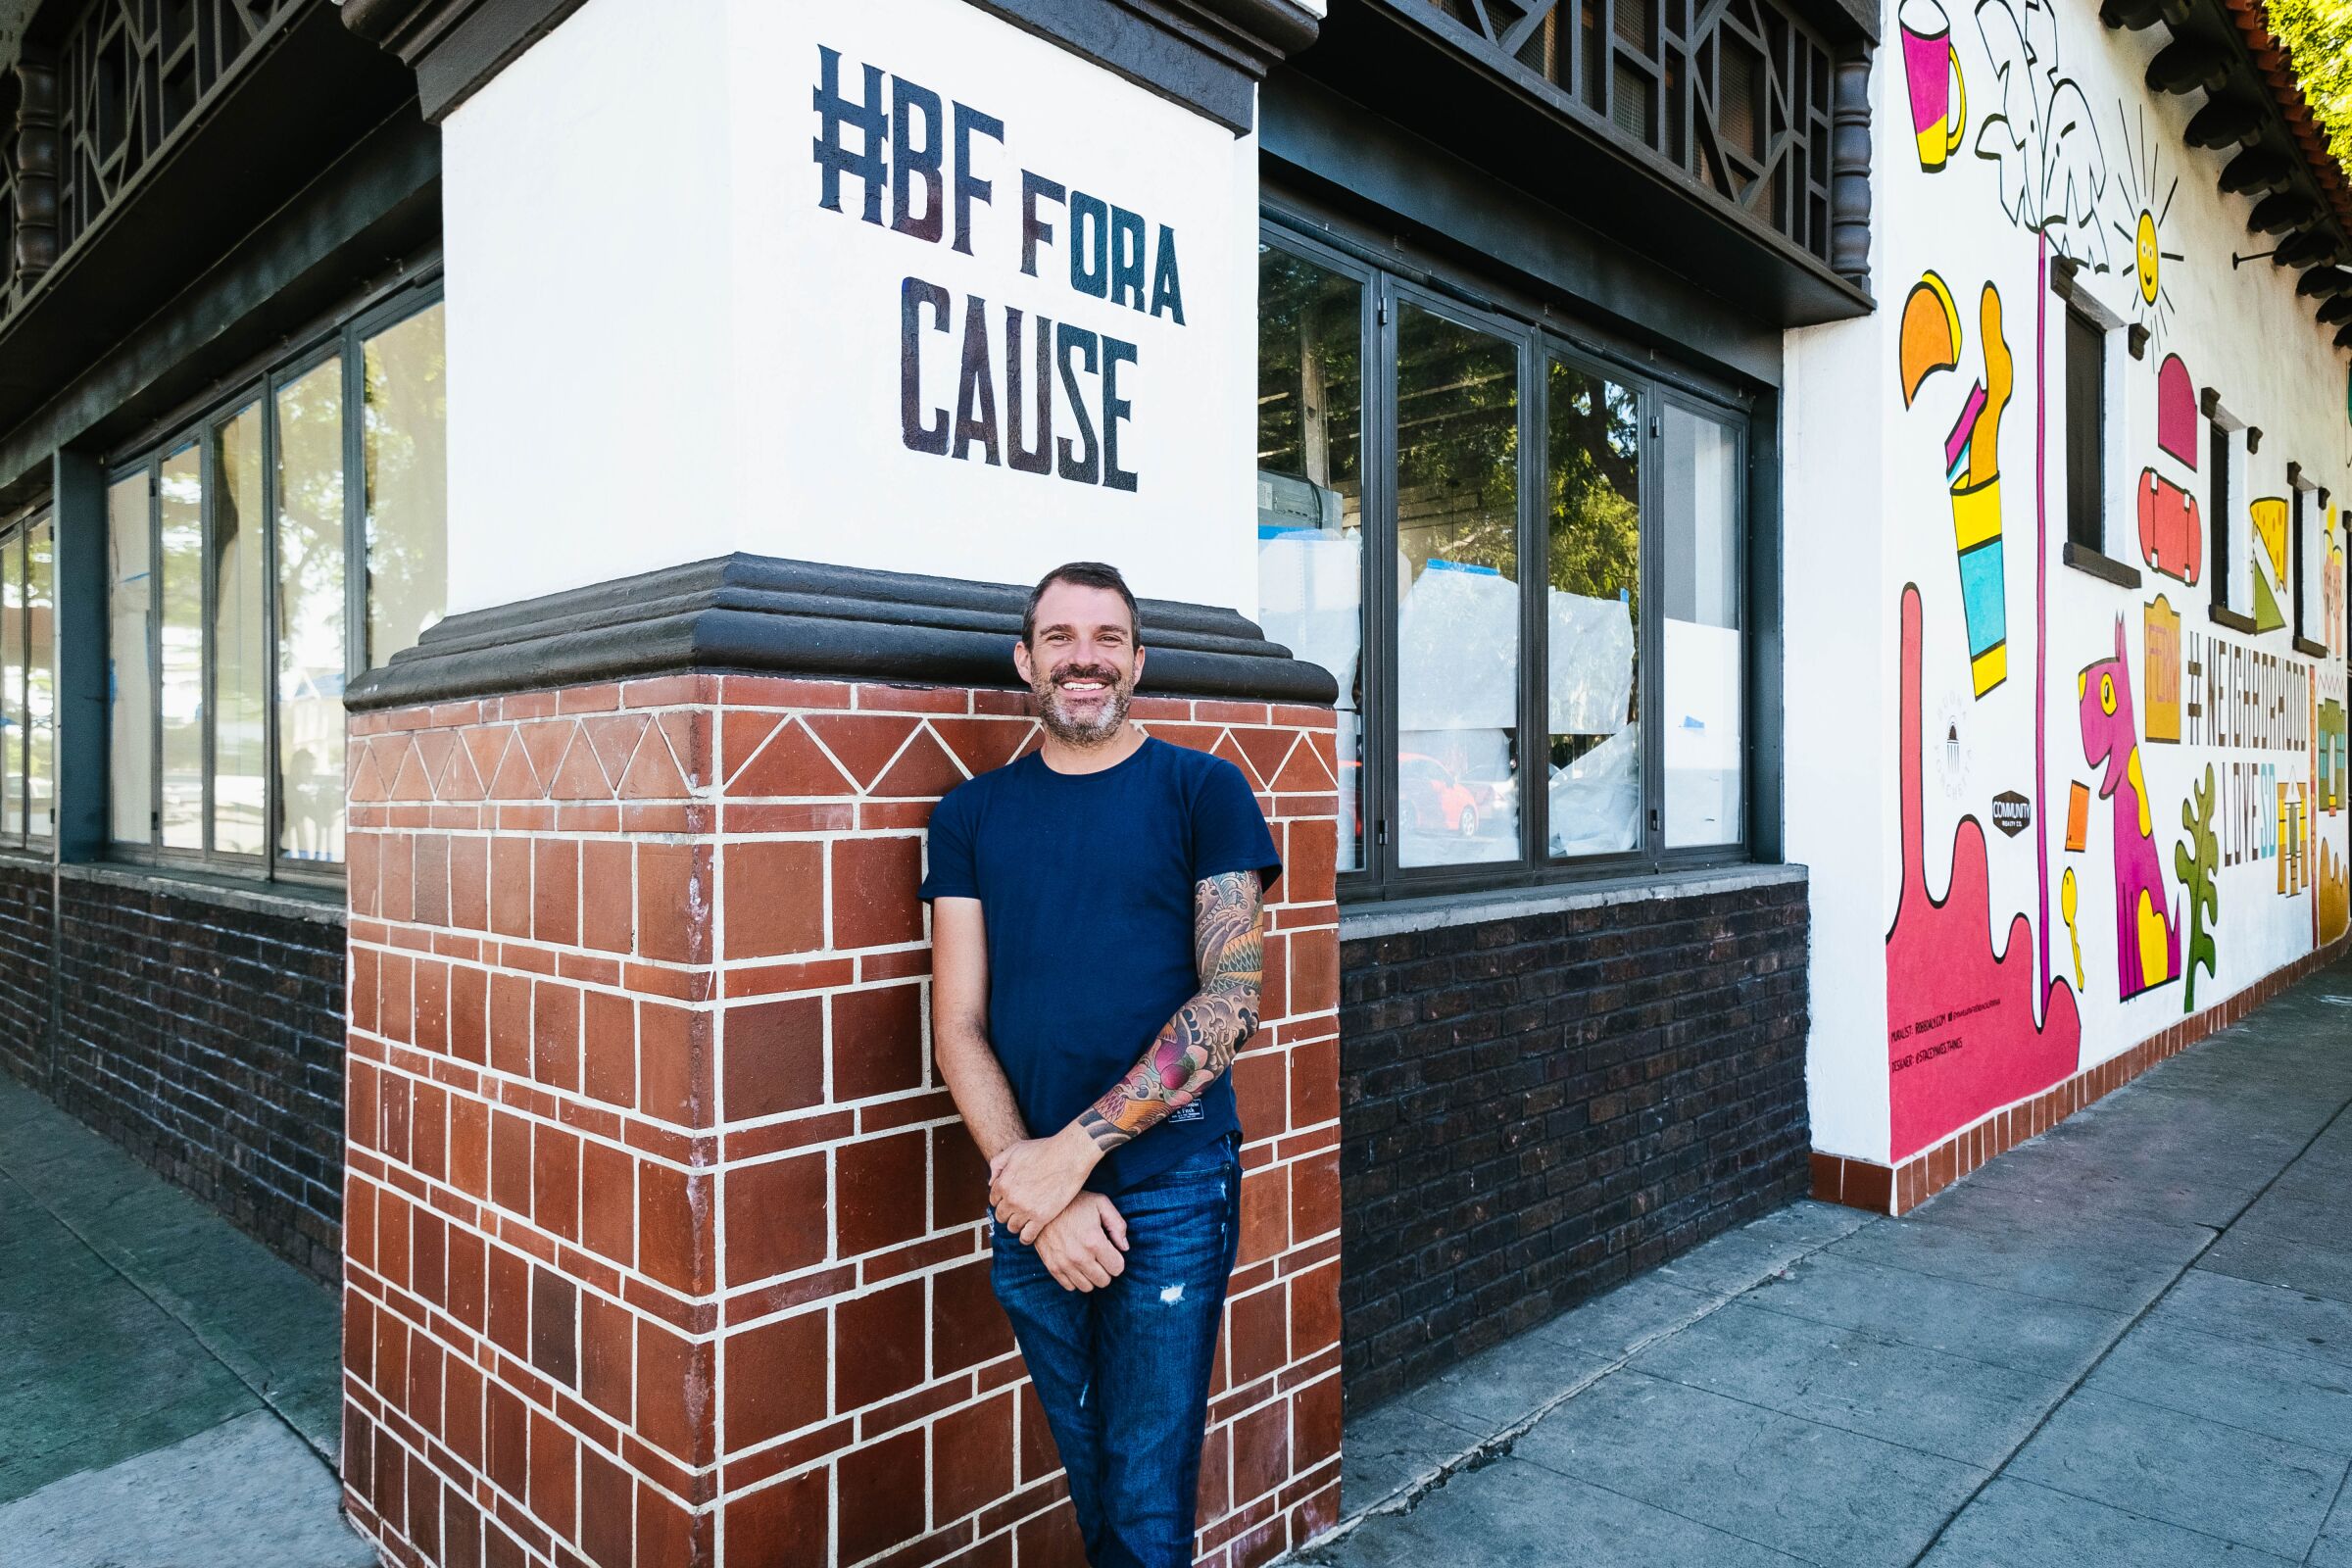 Buona Forchetta founder Matteo Cattanio in front of his new nonprofit restaurant, Matteo, which will open early this year in South Park. It's one of three unique projects he has planned in San Diego this year.